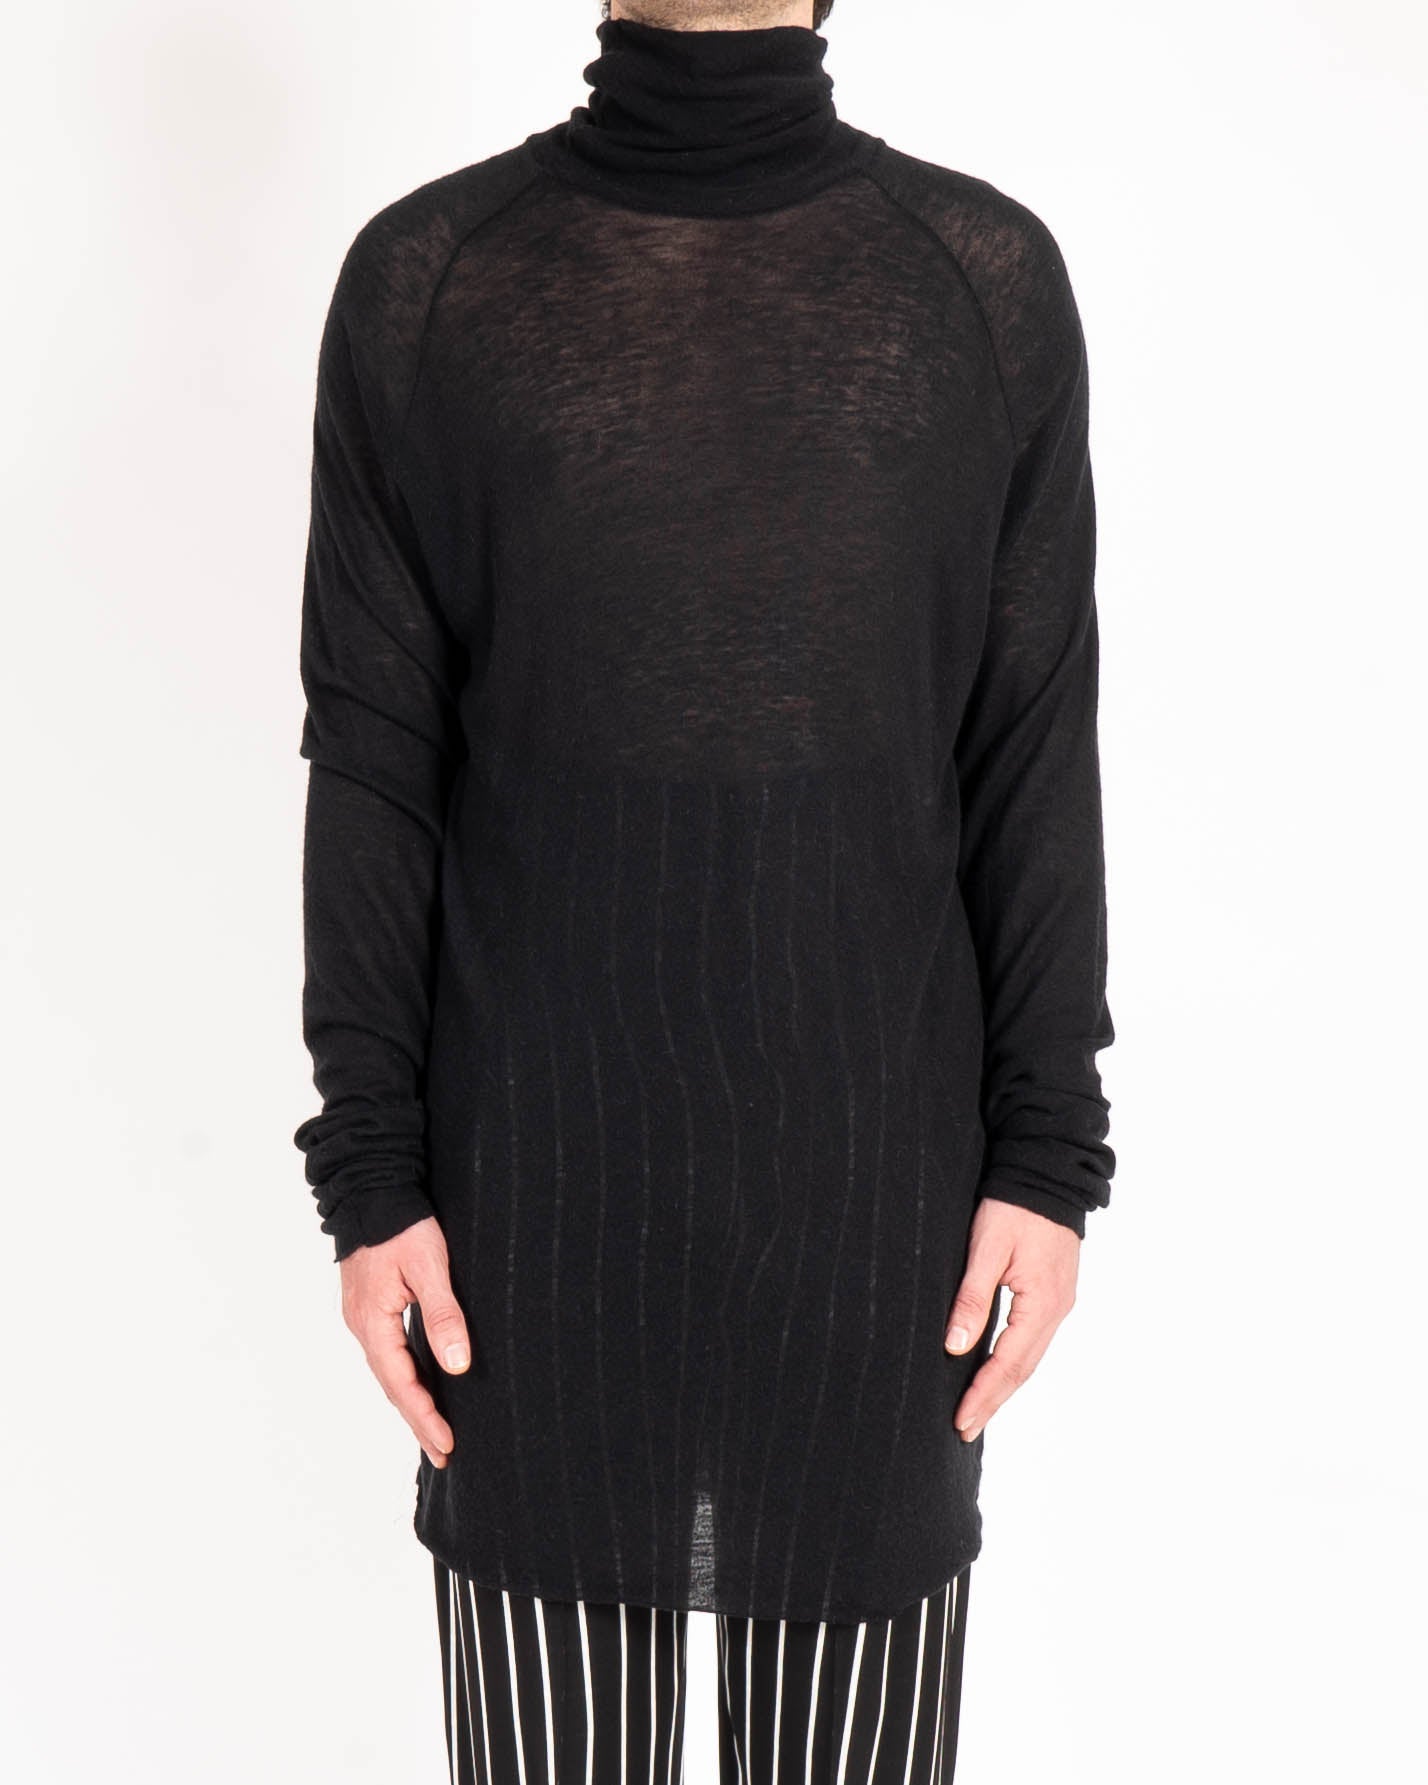 FW15  Oversized Turtle Neck in black Cashmere